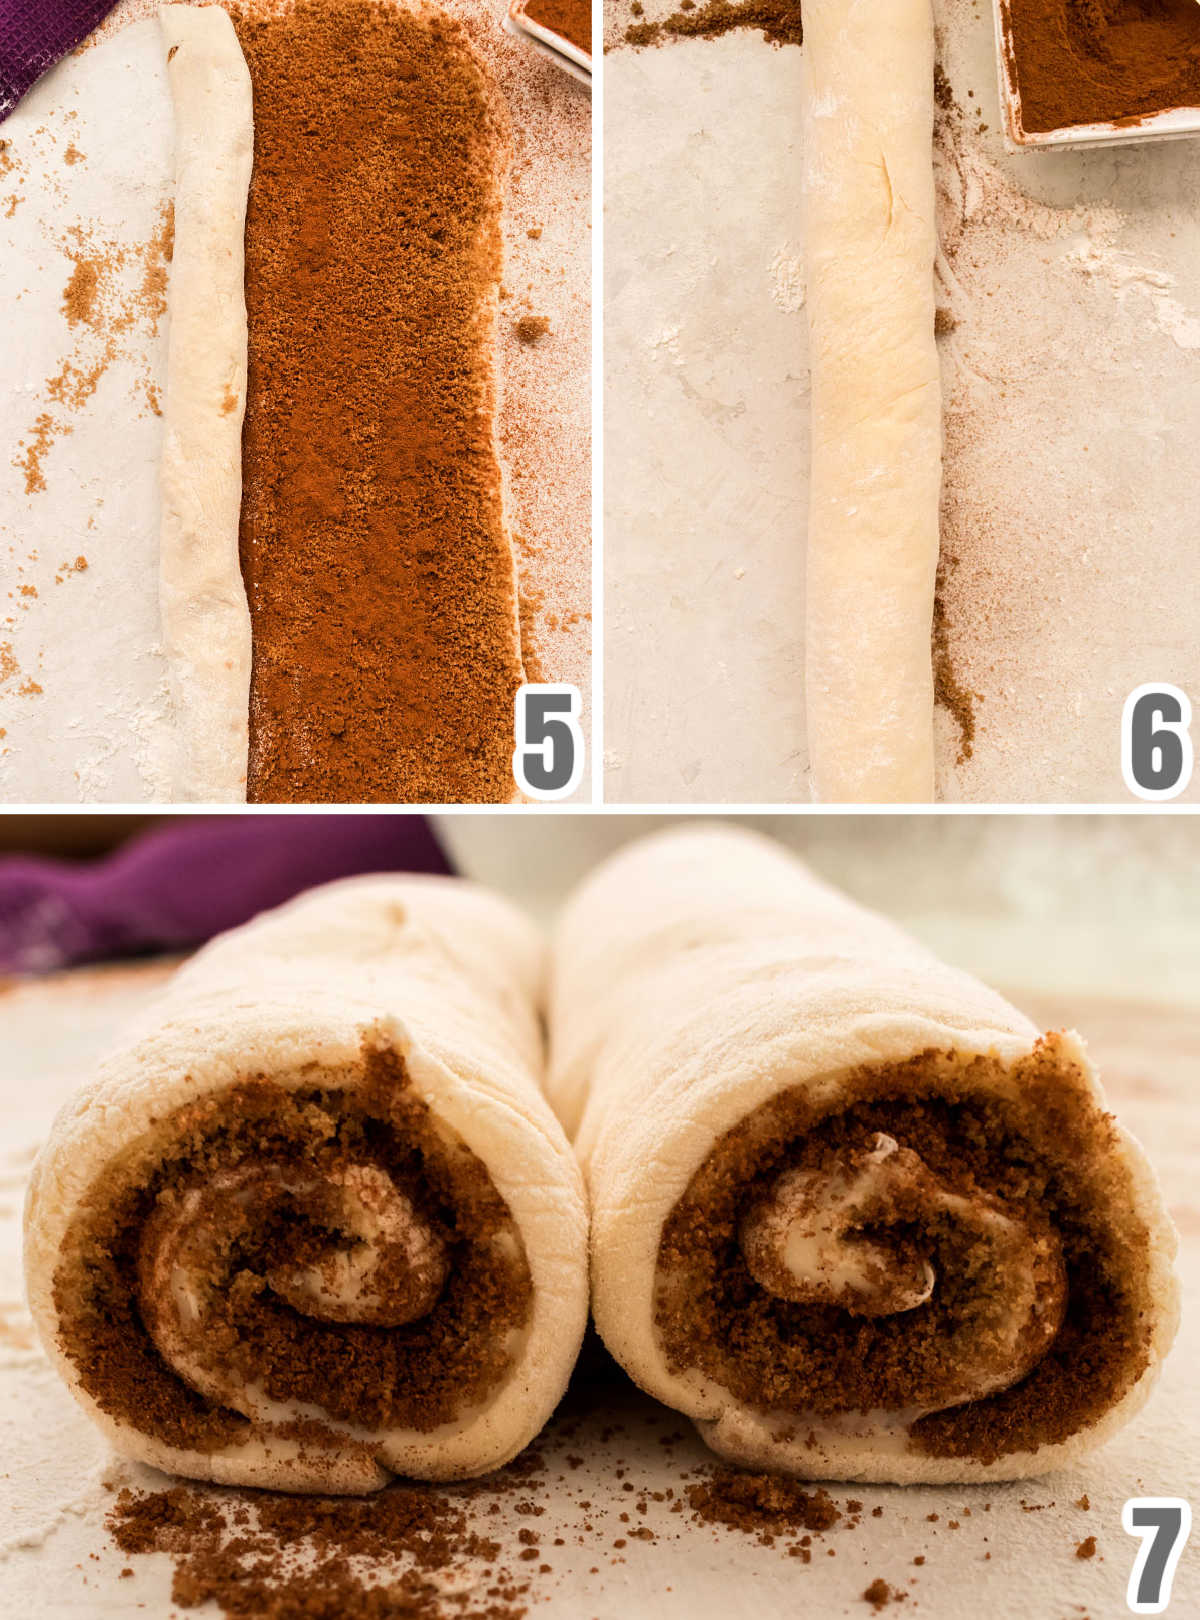 Collage image showing how to roll up the dough and then cut the sticky buns into individual pieces of baking.